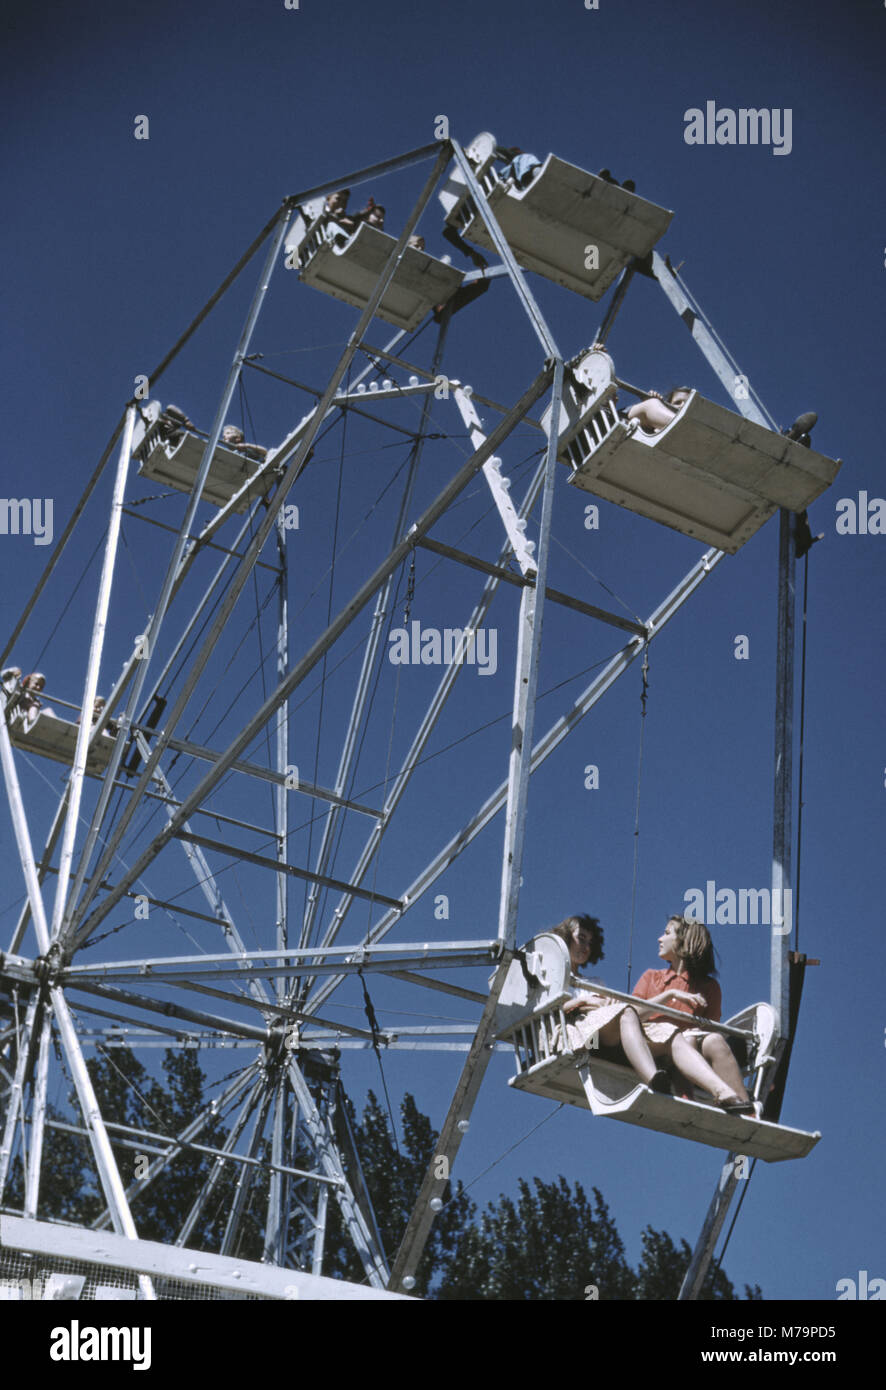 Group of People on Ferris Wheel at State Fair, Rutland, Vermont, USA, Jack Delano for Farm Security Administration - Office of War Information, September 1941 Stock Photo